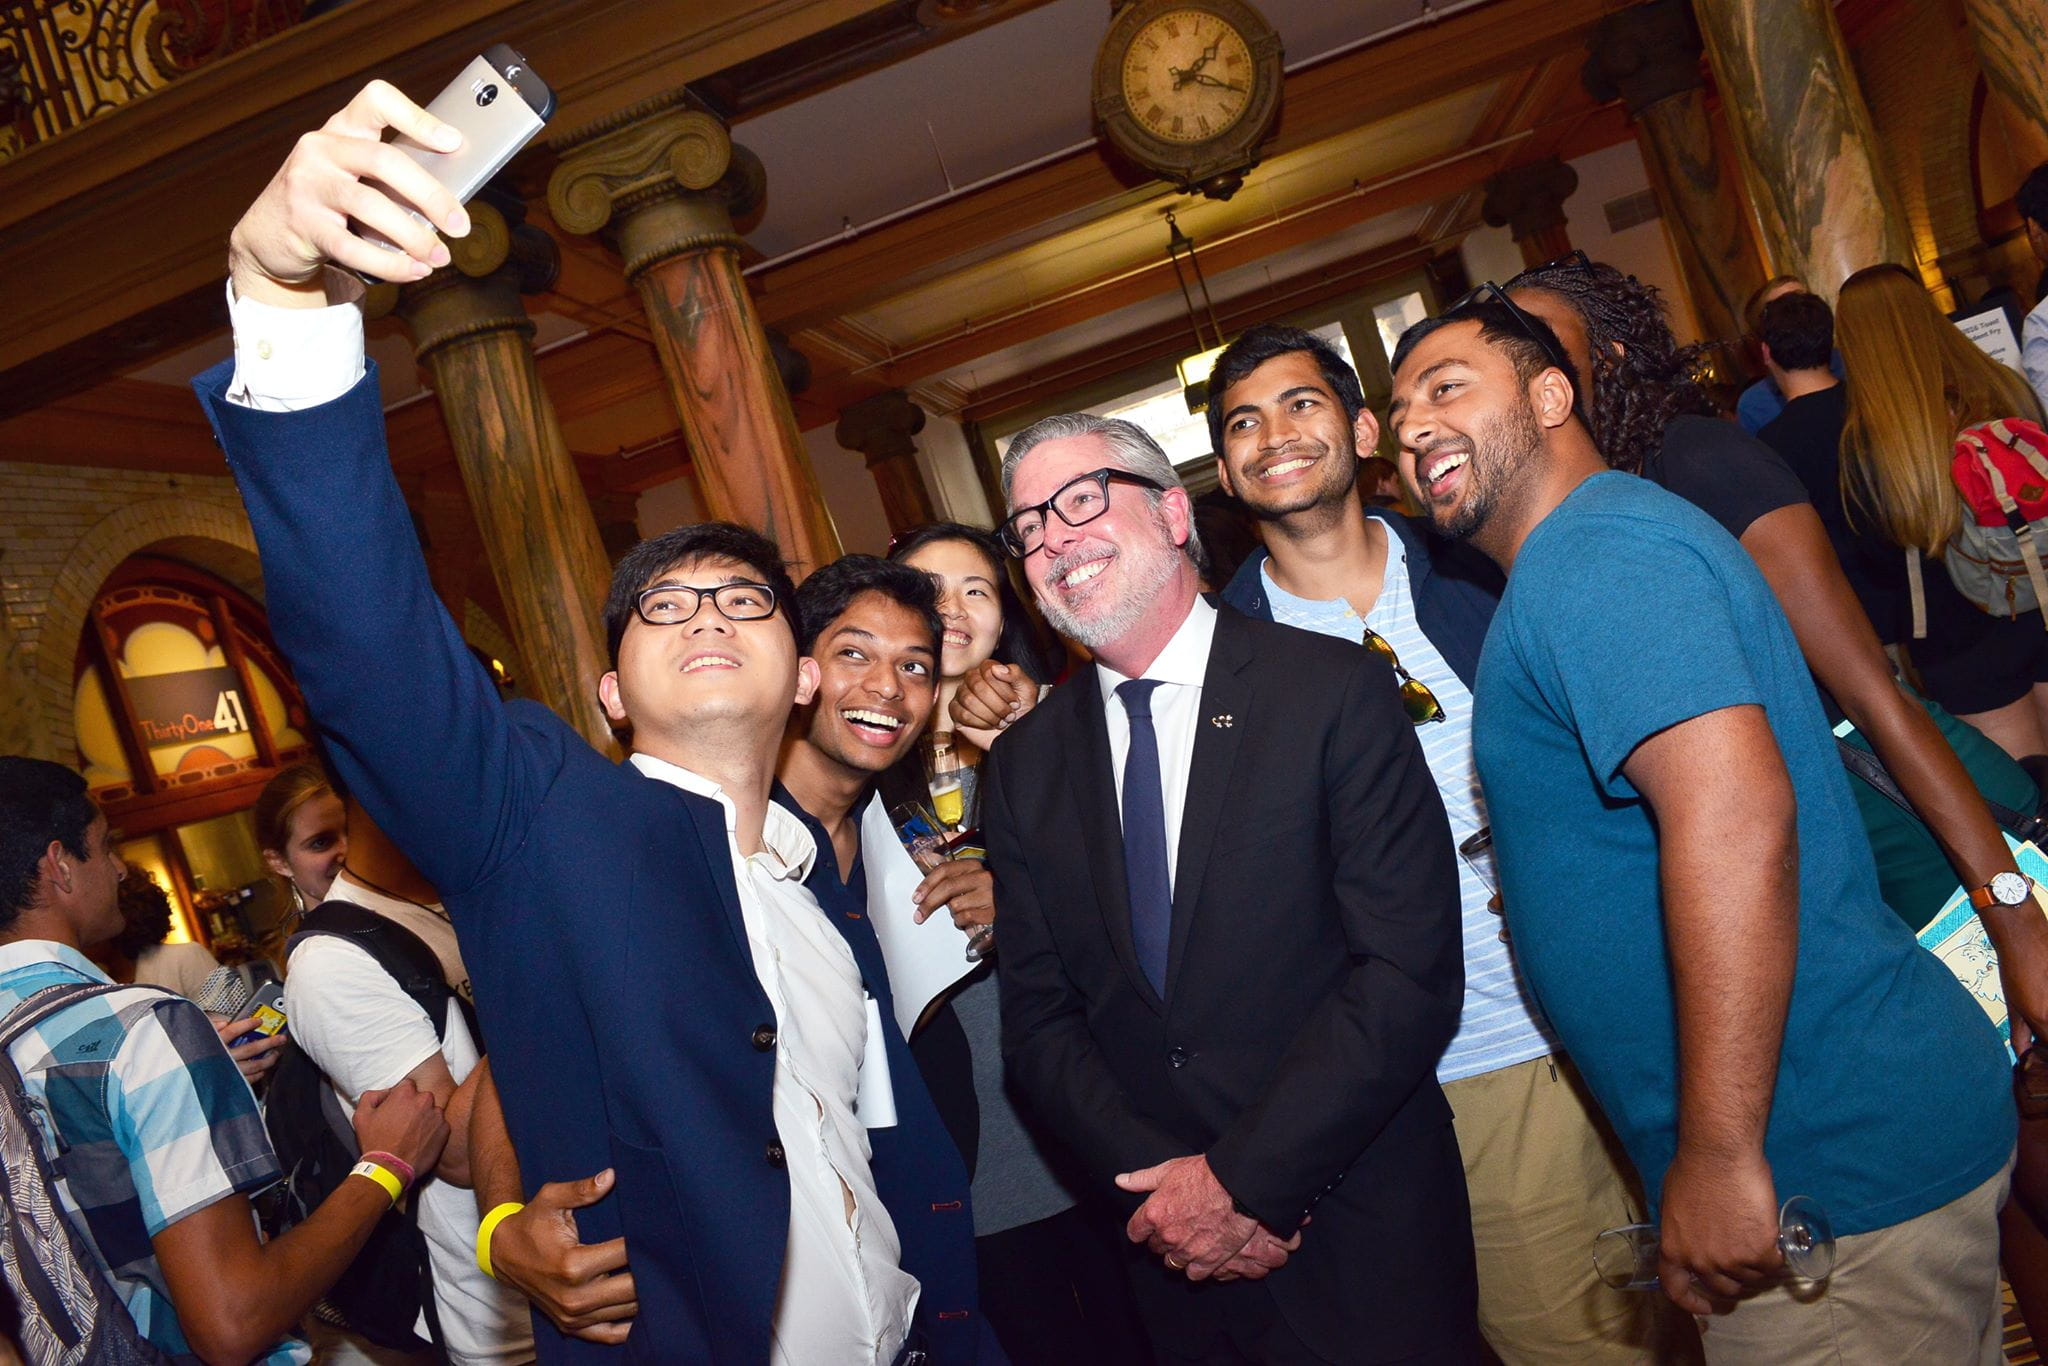 President John Fry taking a group selfie with graduating seniors at the Senior Toast event which was held in the lobby of Main Building.